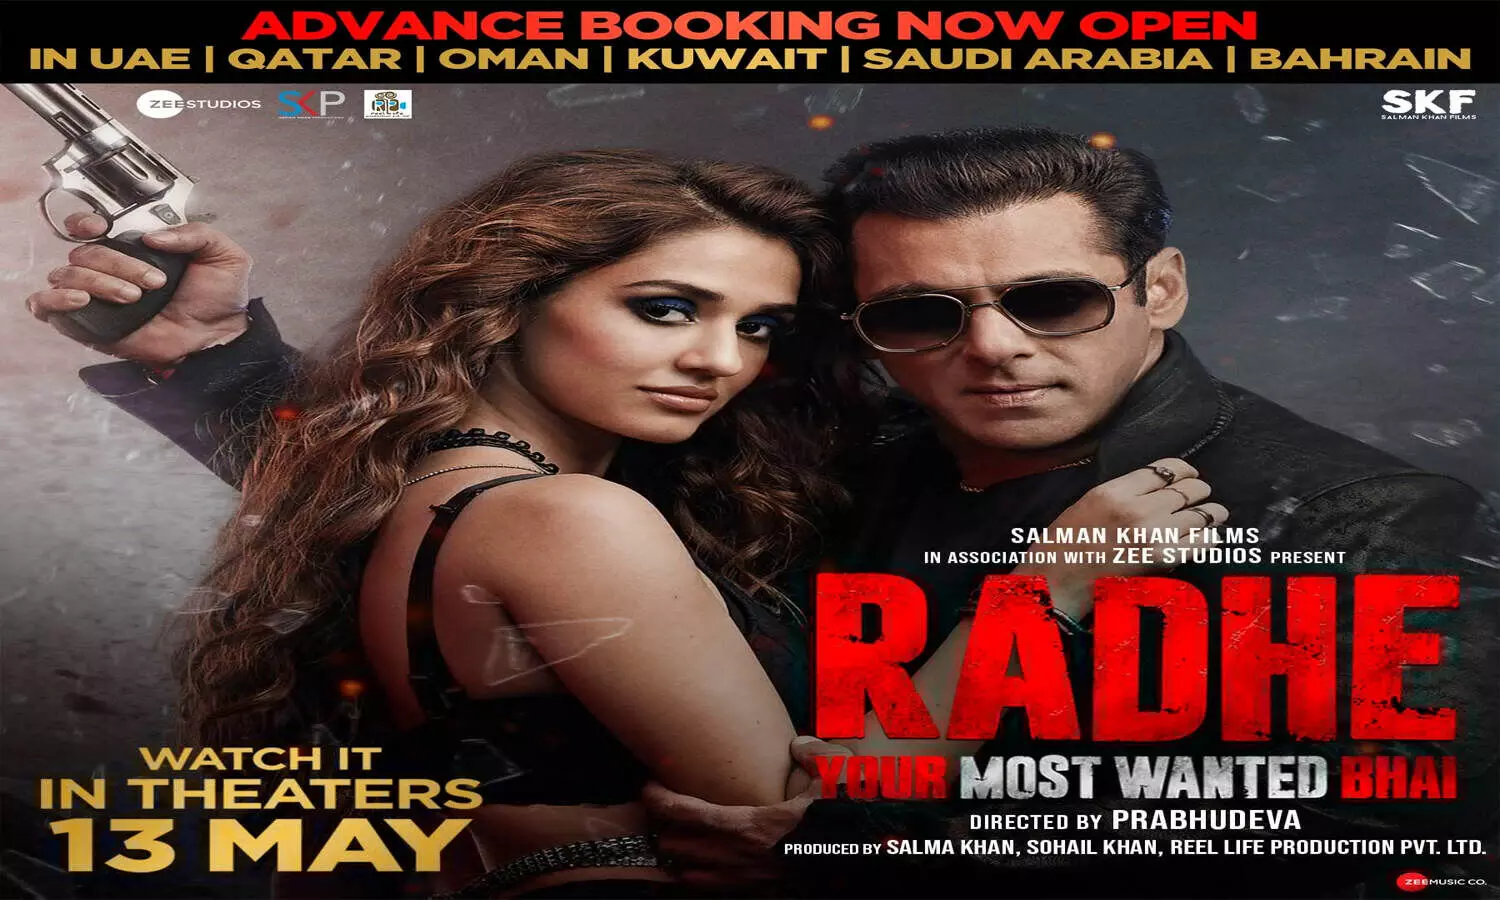 film Radhe will be released in Theaters of the UAE.